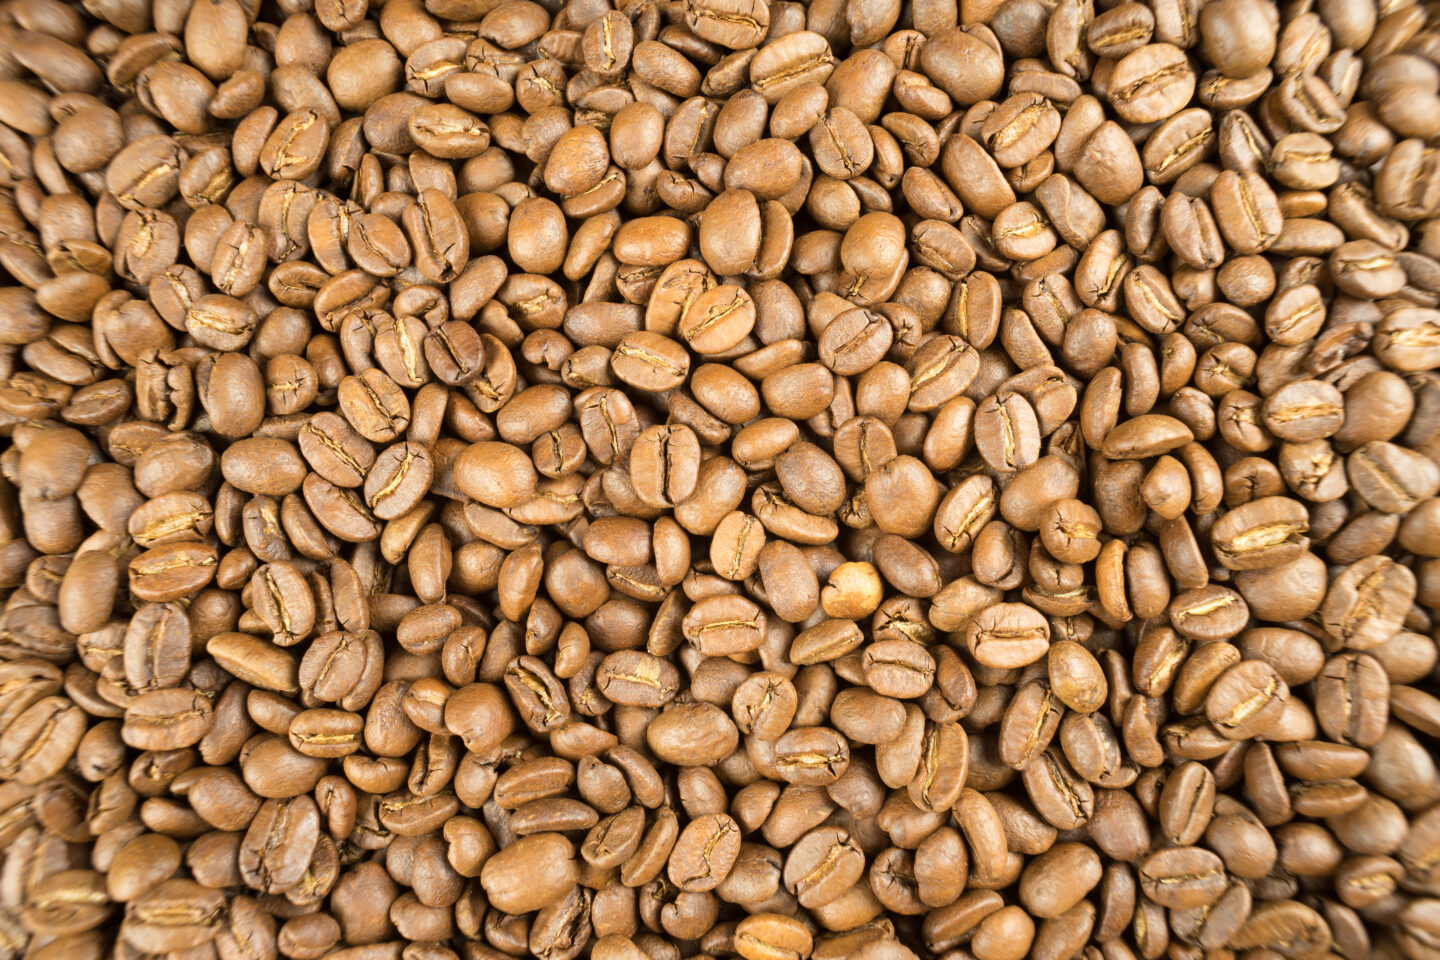 Lightly,Roasted,Brown,Coffee,Beans.,Potential,Use,As,A,Background.